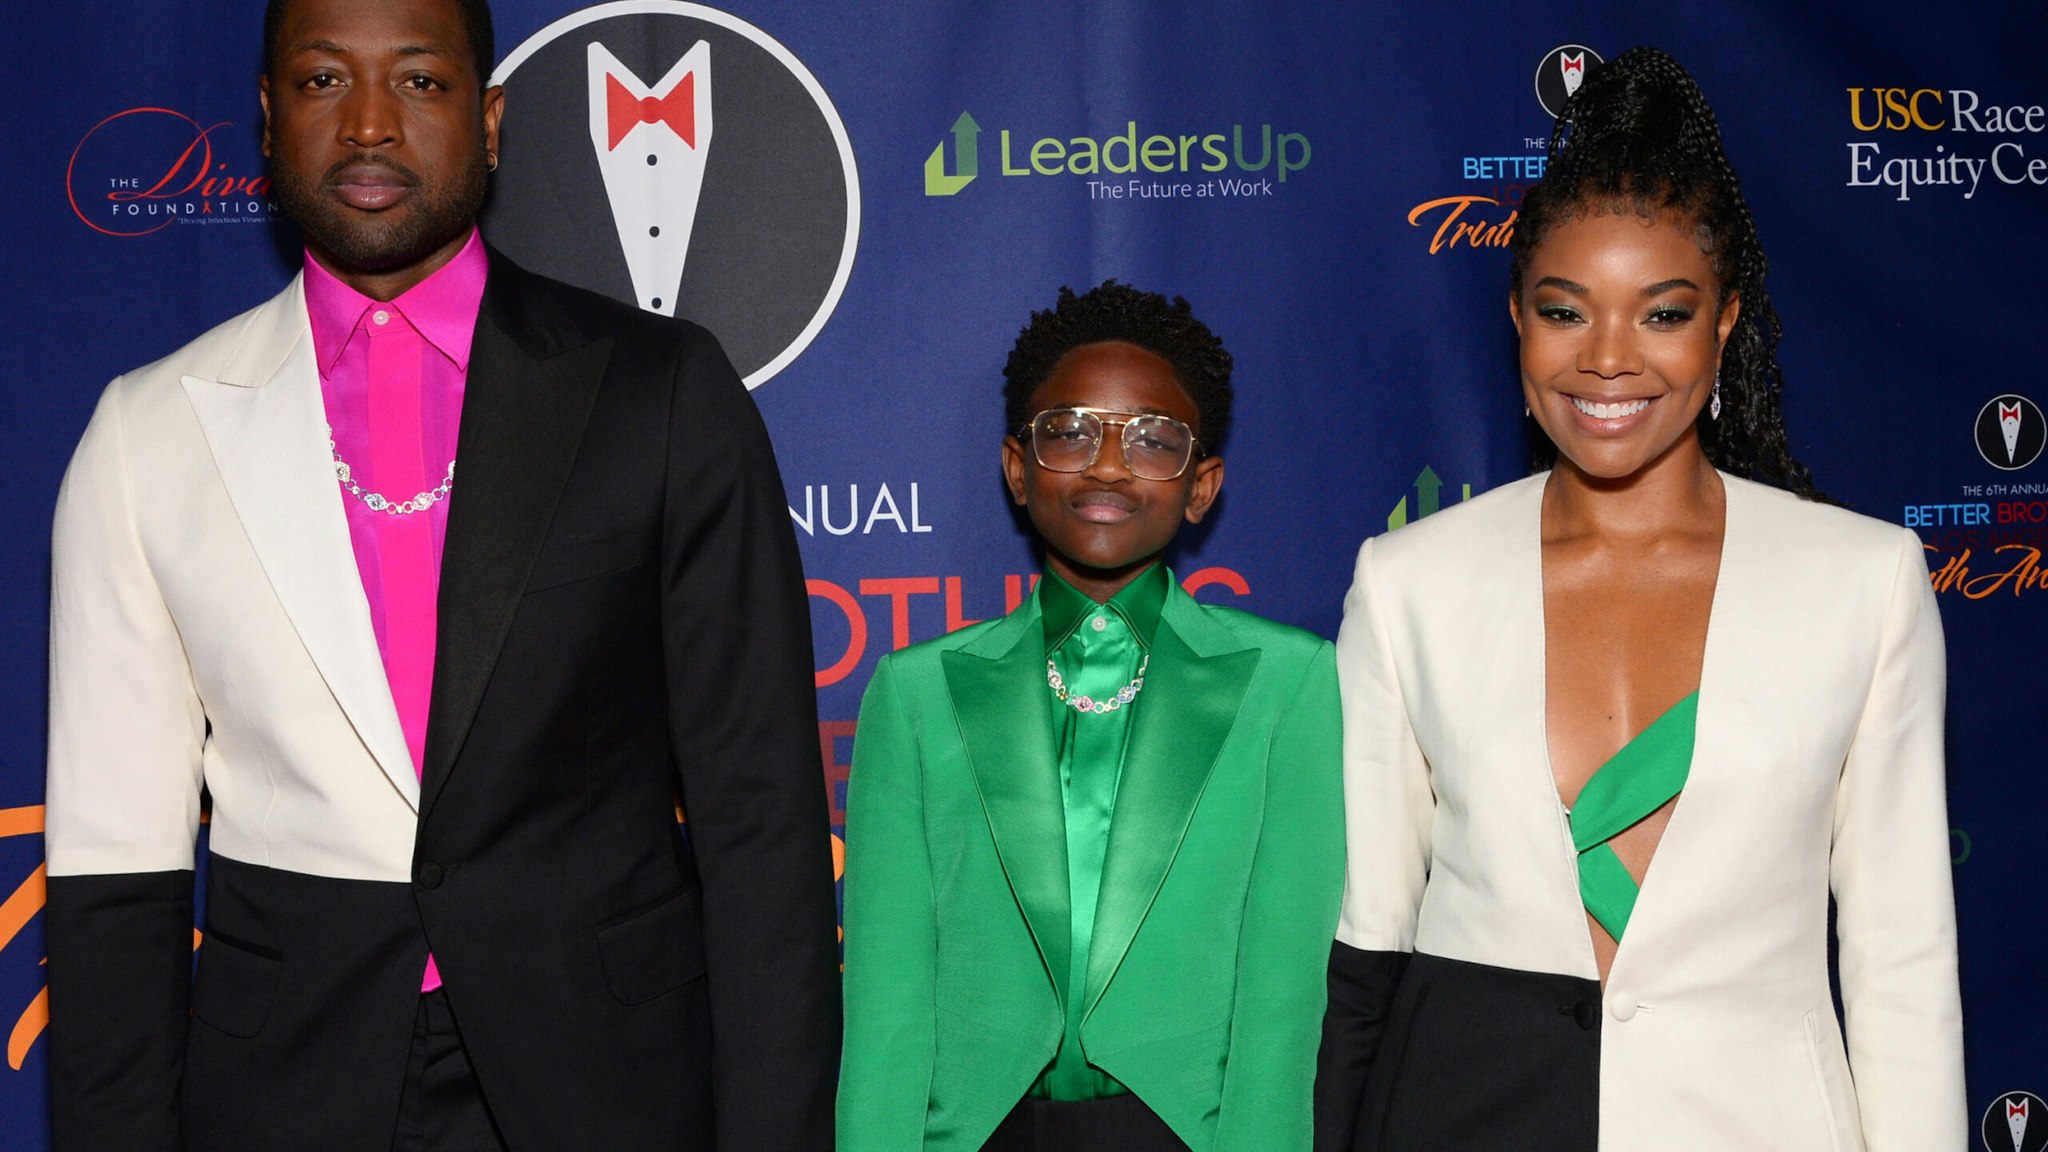 The ex-wife of former NBA superstar Dwyane Wade is asking a judge to stop their 15-year-old biological son from a gender transition, and accusing the future Hall of Famer of exploiting the child, according to a report. Legal documents obtained by The Blast show Siohvaughn Funches-Wade is seeking to block her 15-year-old child Zaya, previously known as Zion, from legally changing name and gender until reaching age 18.